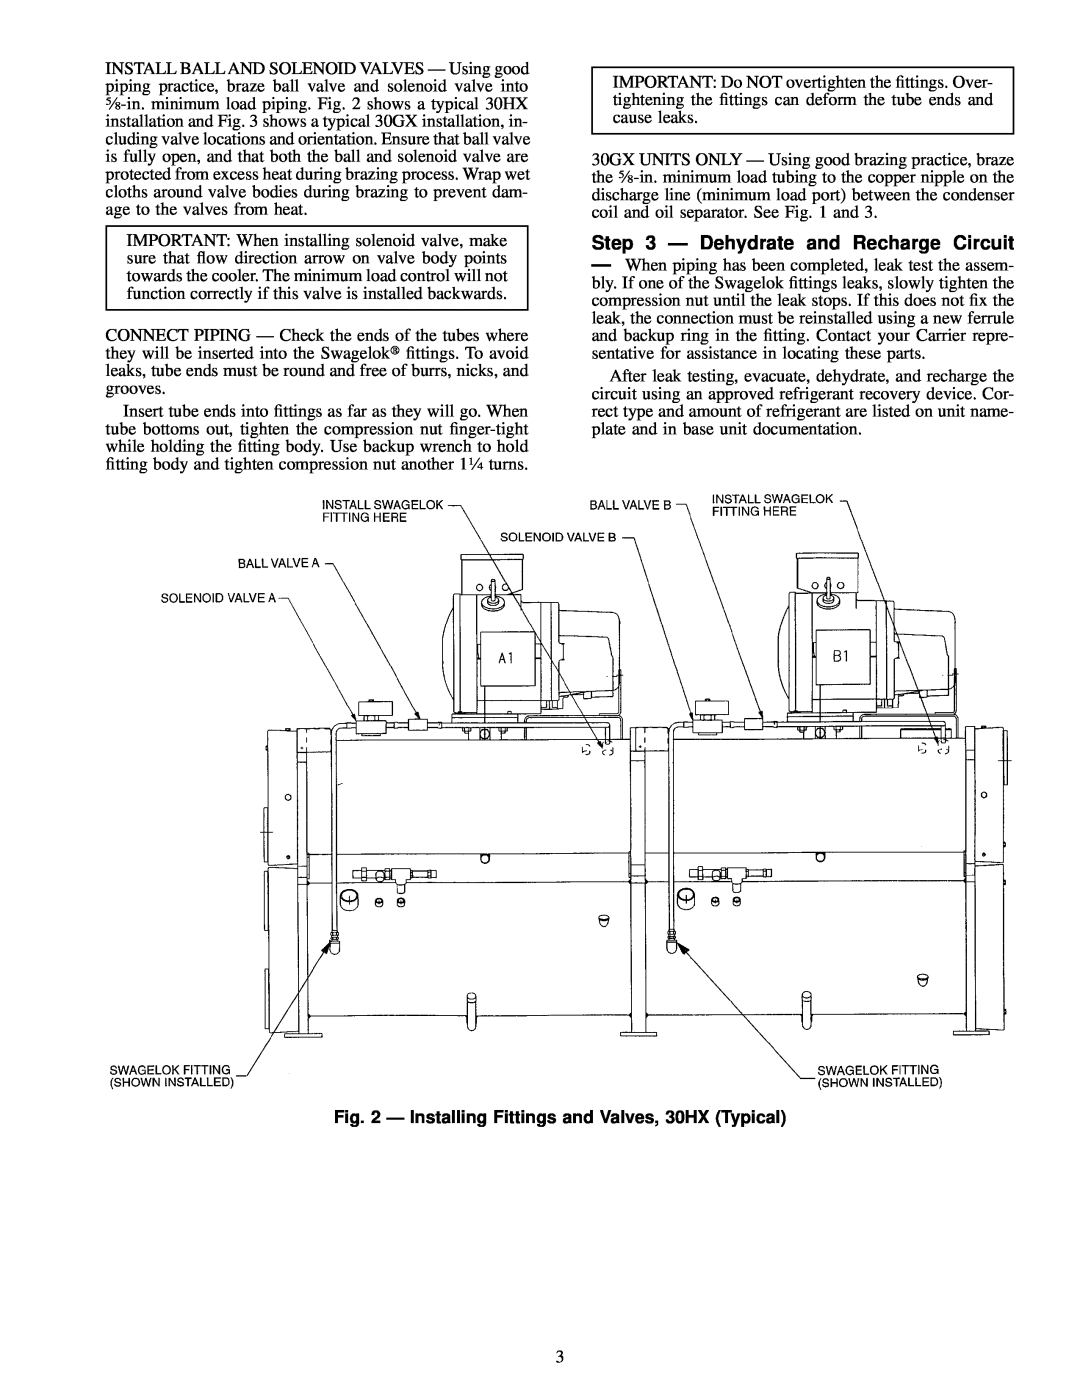 Carrier 30HX076-271, 30GX080-176 installation instructions Ð Dehydrate and Recharge Circuit 